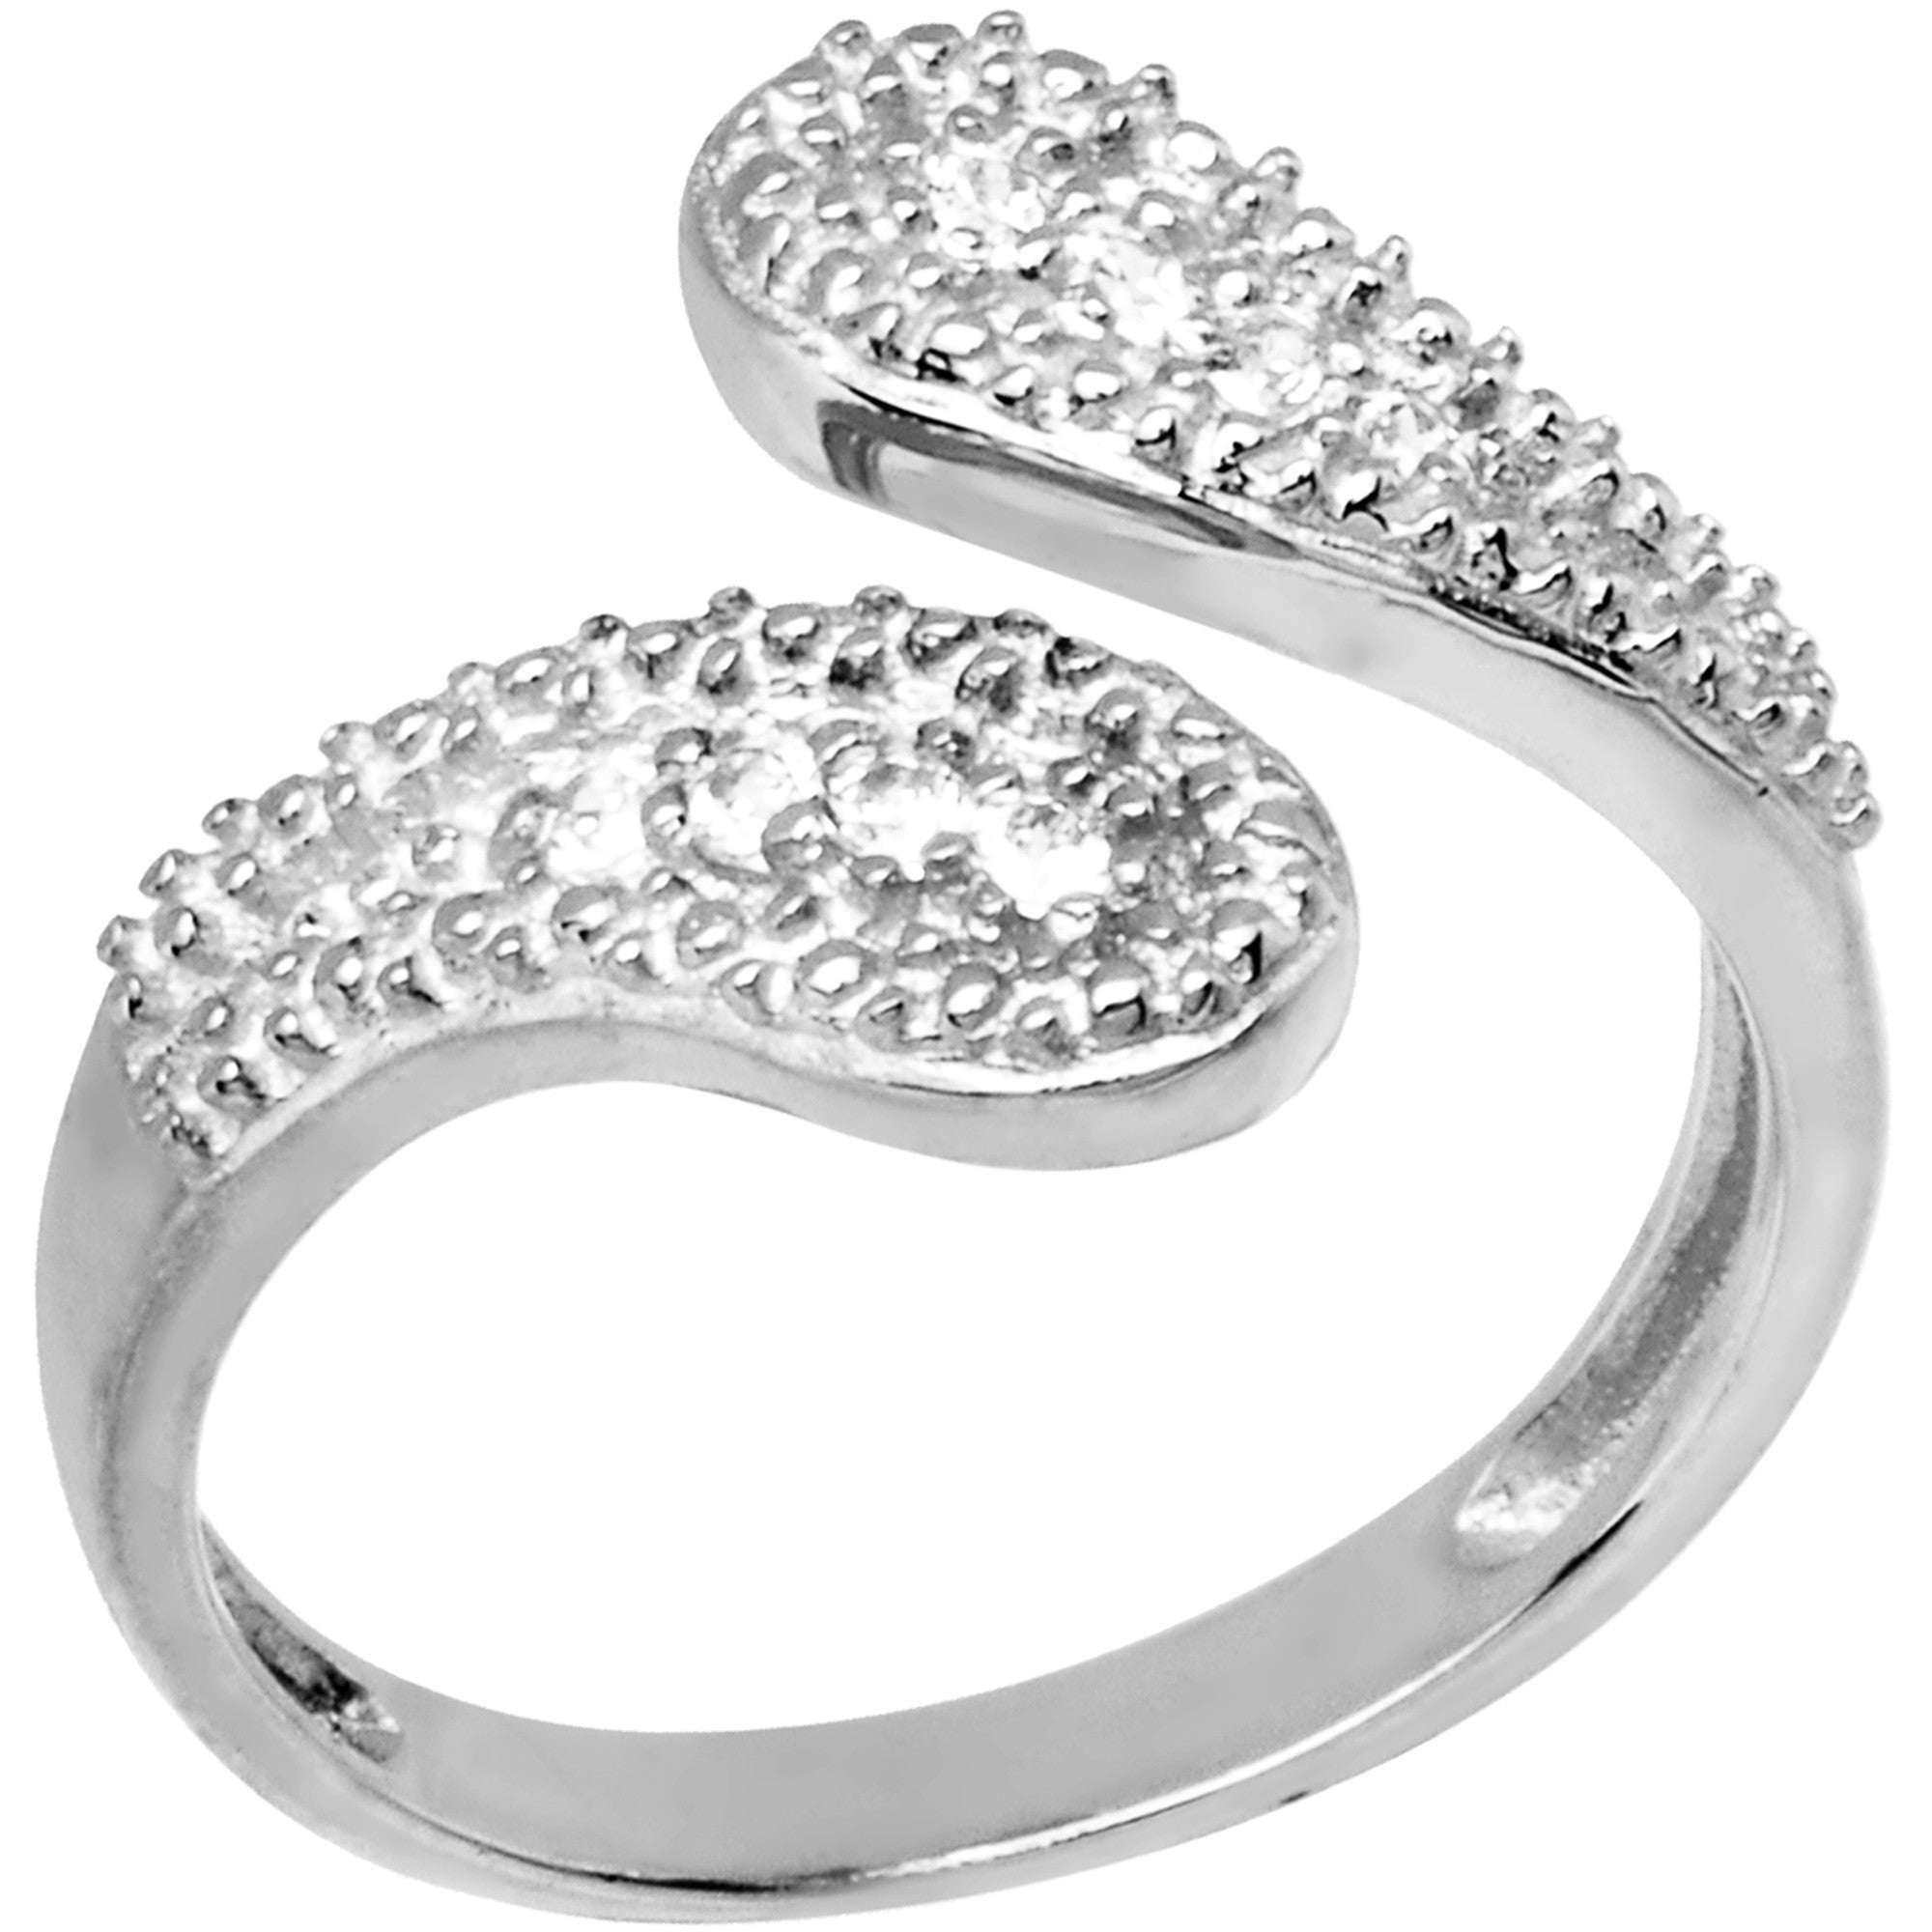 14kt White Gold Cubic Zirconia Wrap Toe Ring